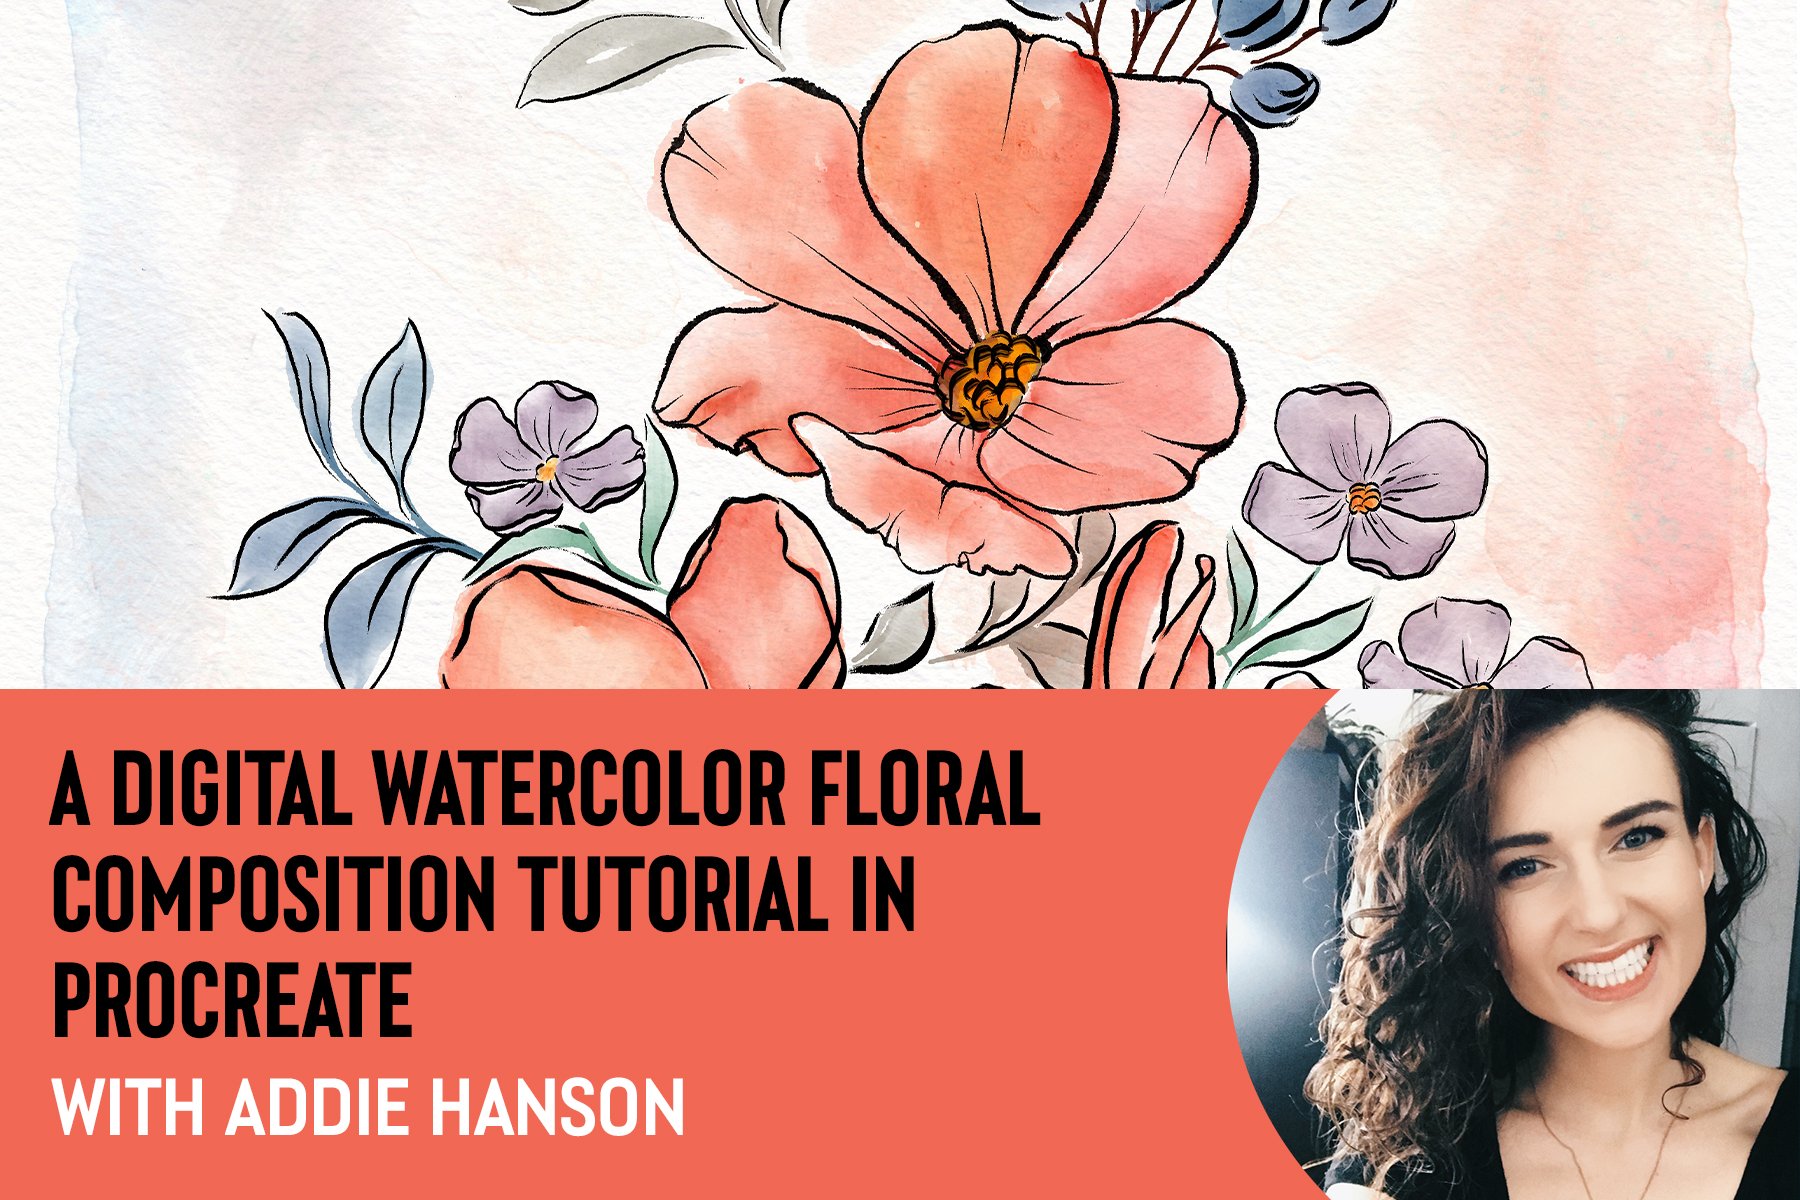 Part 1: A Digital Watercolor Floral Composition Tutorial in Procreate With Addie Hanson